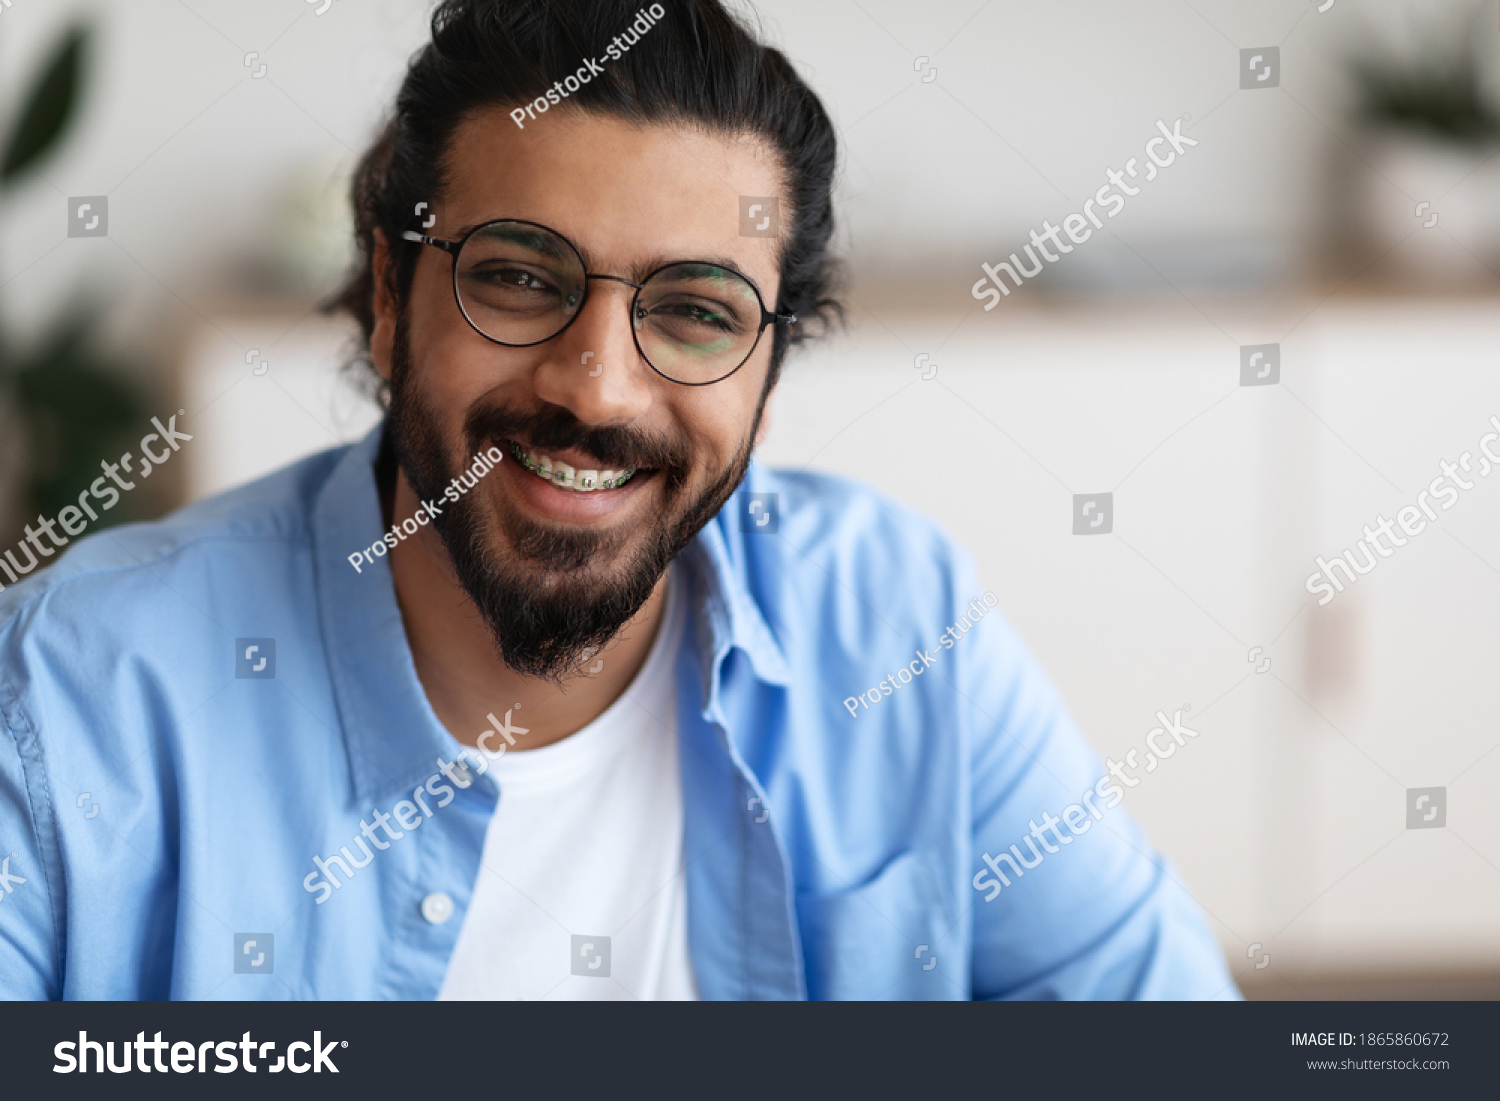 Closeup Portrait Of Positive Indian Guy With Dental Braces And Eyeglasses Smiling At Camera, Handsome Bearded Millennial Man With Brackets On Teeth Posing Indoors, Selective Focus With Copy Space #1865860672